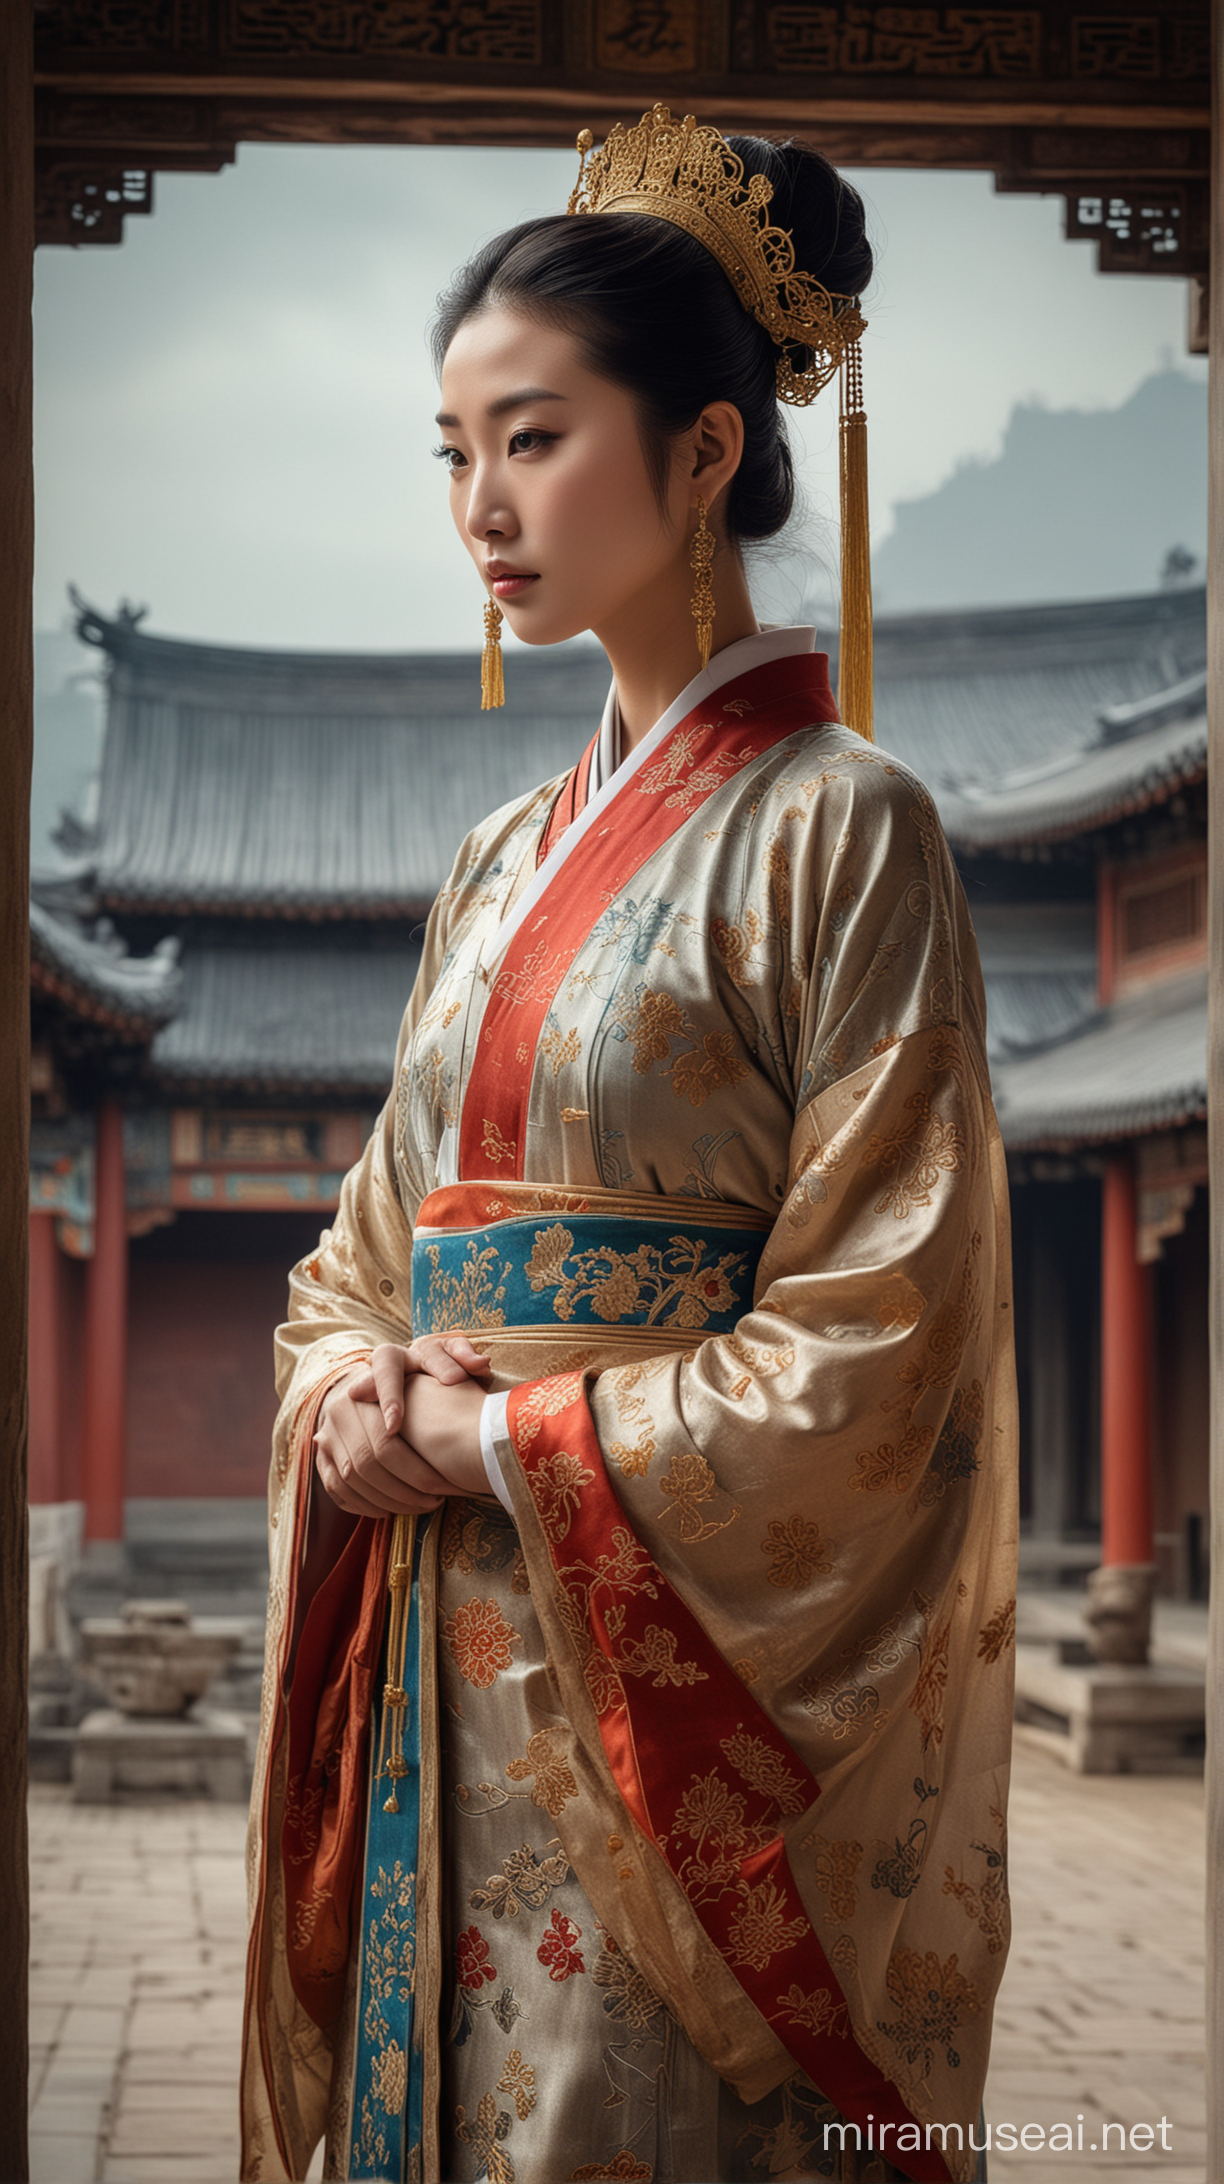 A (((beautiful ancient Chinese woman from the Sung dynasty))), dressed in elaborate ((traditional attire)), her gaze directed softly downwards amidst a (moody backdrop of ancient Chinese architecture)